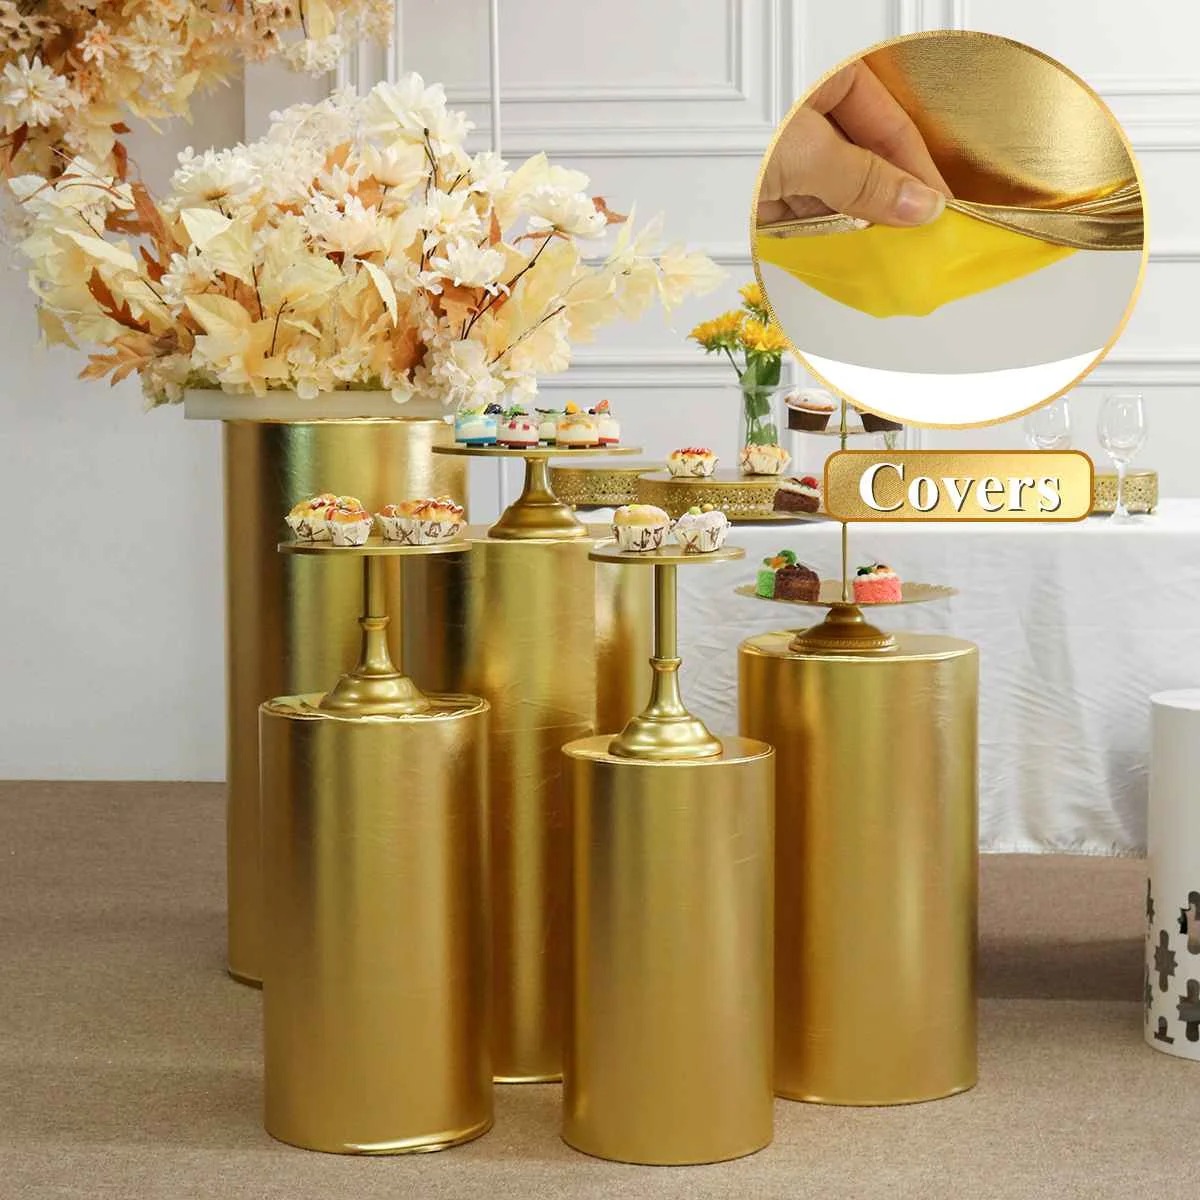 5pcs Gold New products Round Cylinder Cover Pedestal Display Art Decor Plinths Pillars for DIY Wedding Decorations Holiday Party